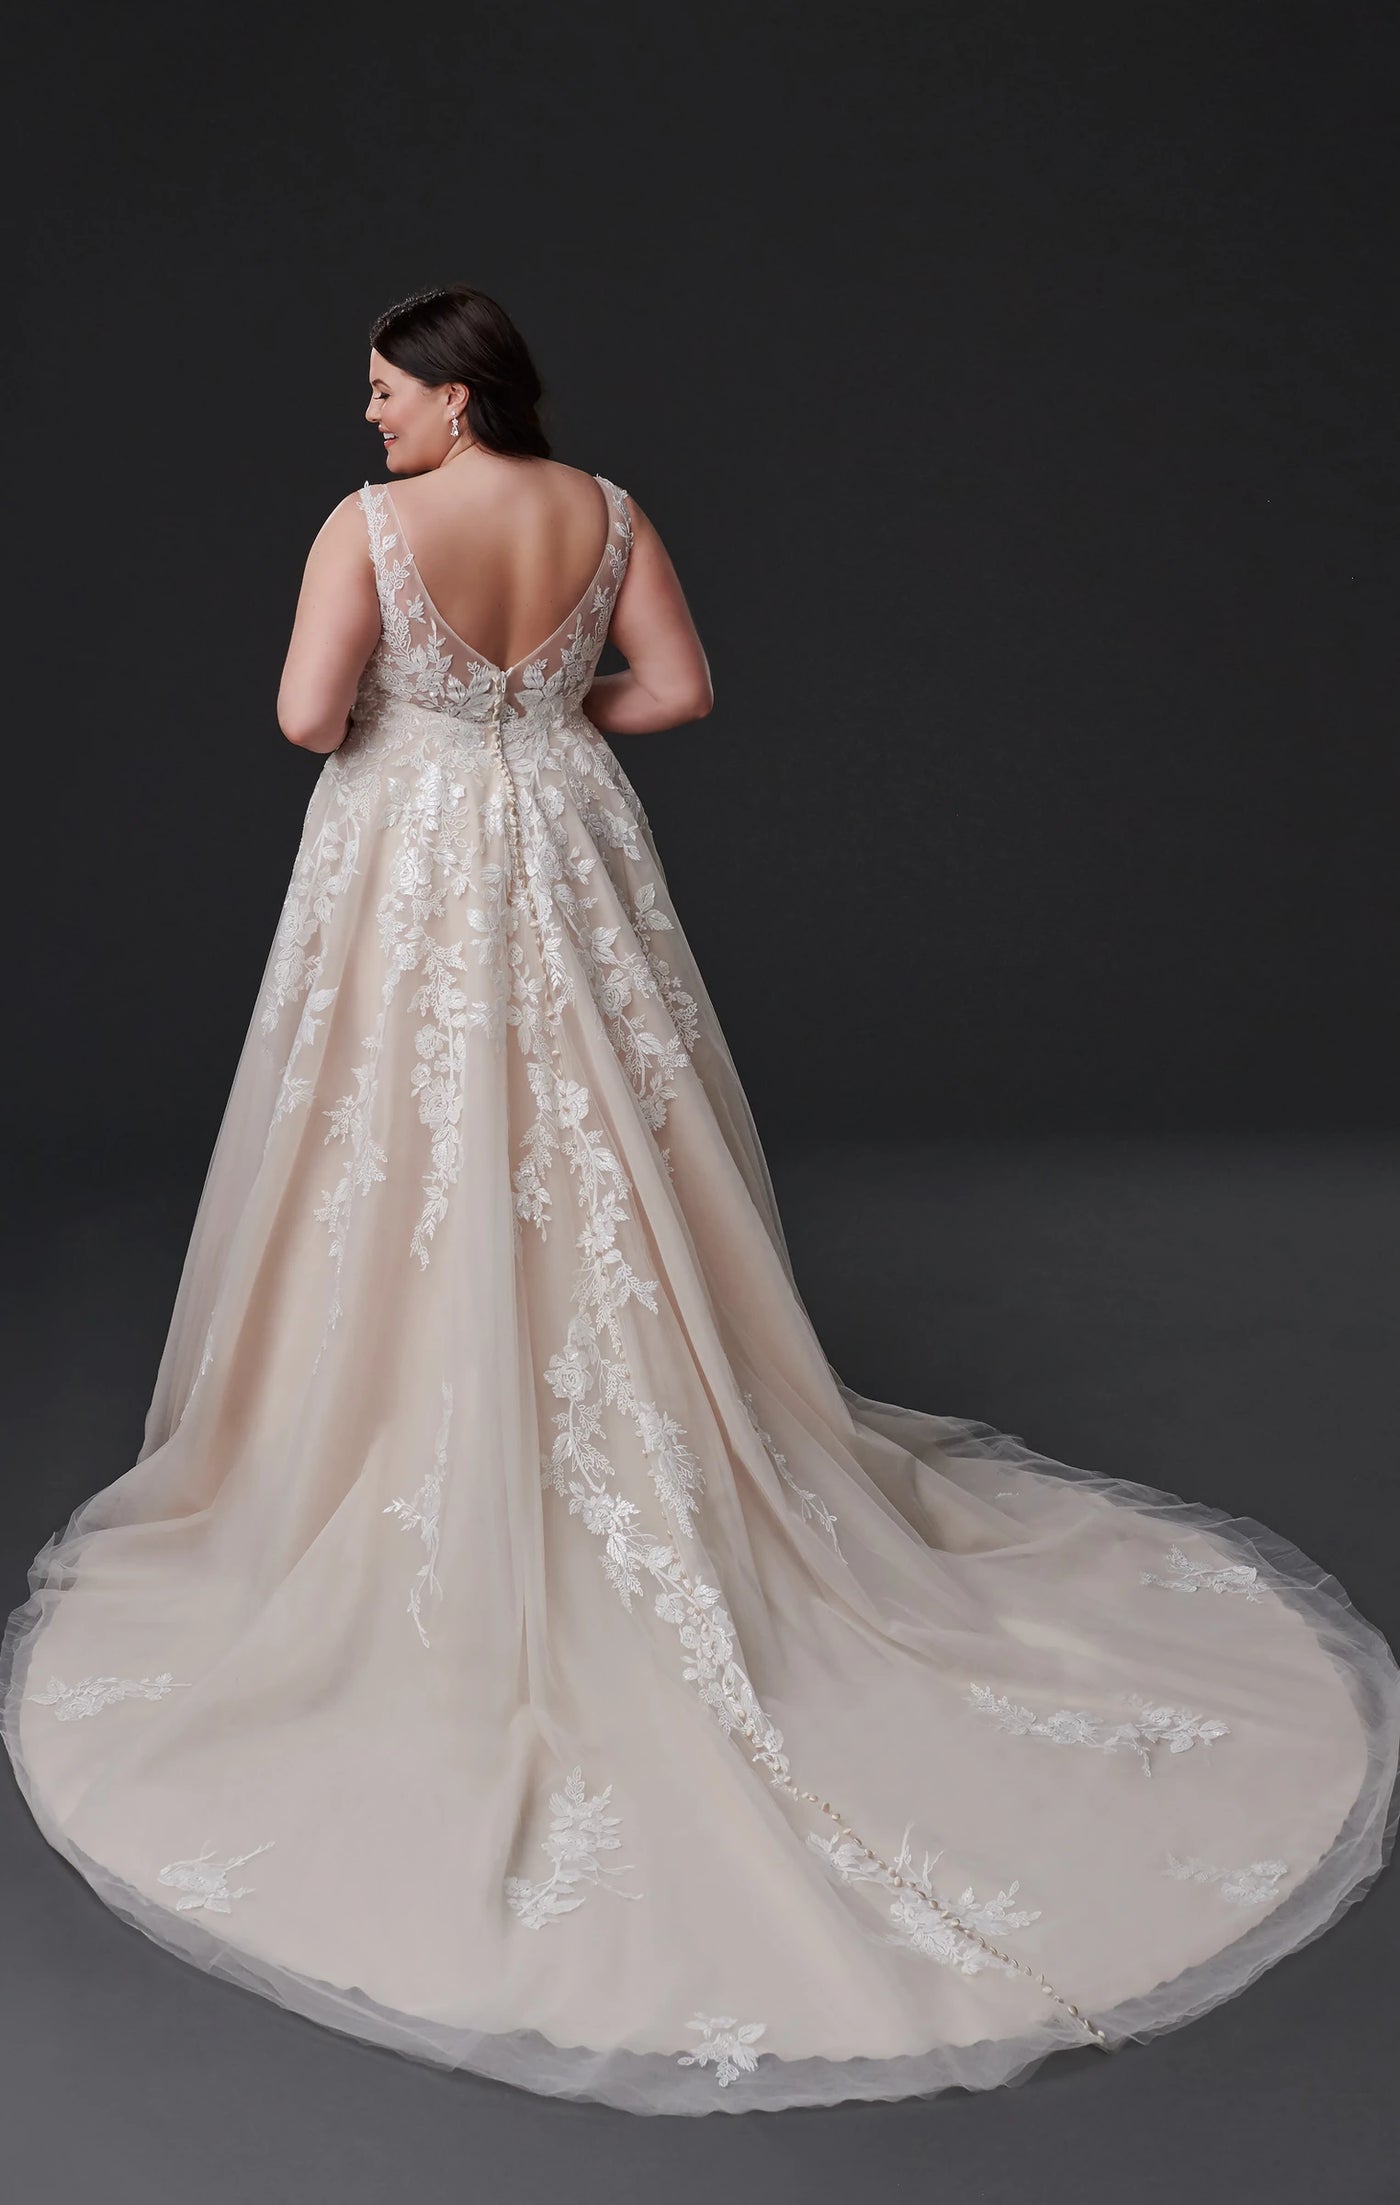 A woman in an elegant Eddy K Geneva - Off The Rack A-line wedding dress with intricate lace detailing and floral appliqués seen from the back at Bergamot Bridal.